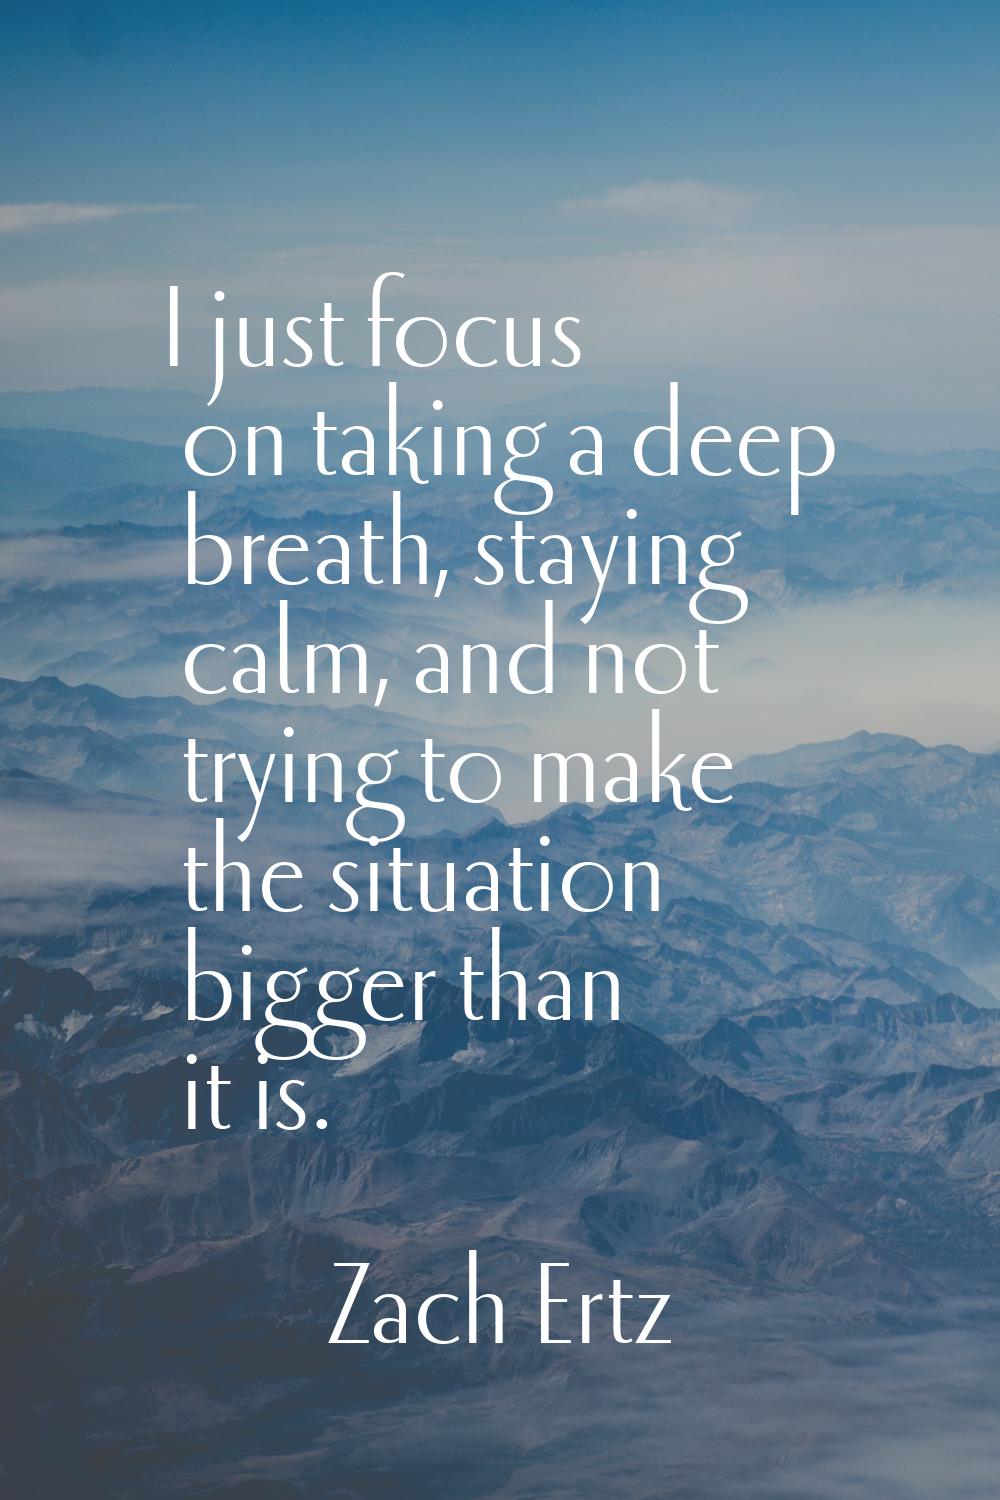 I just focus on taking a deep breath, staying calm, and not trying to make the situation bigger tha